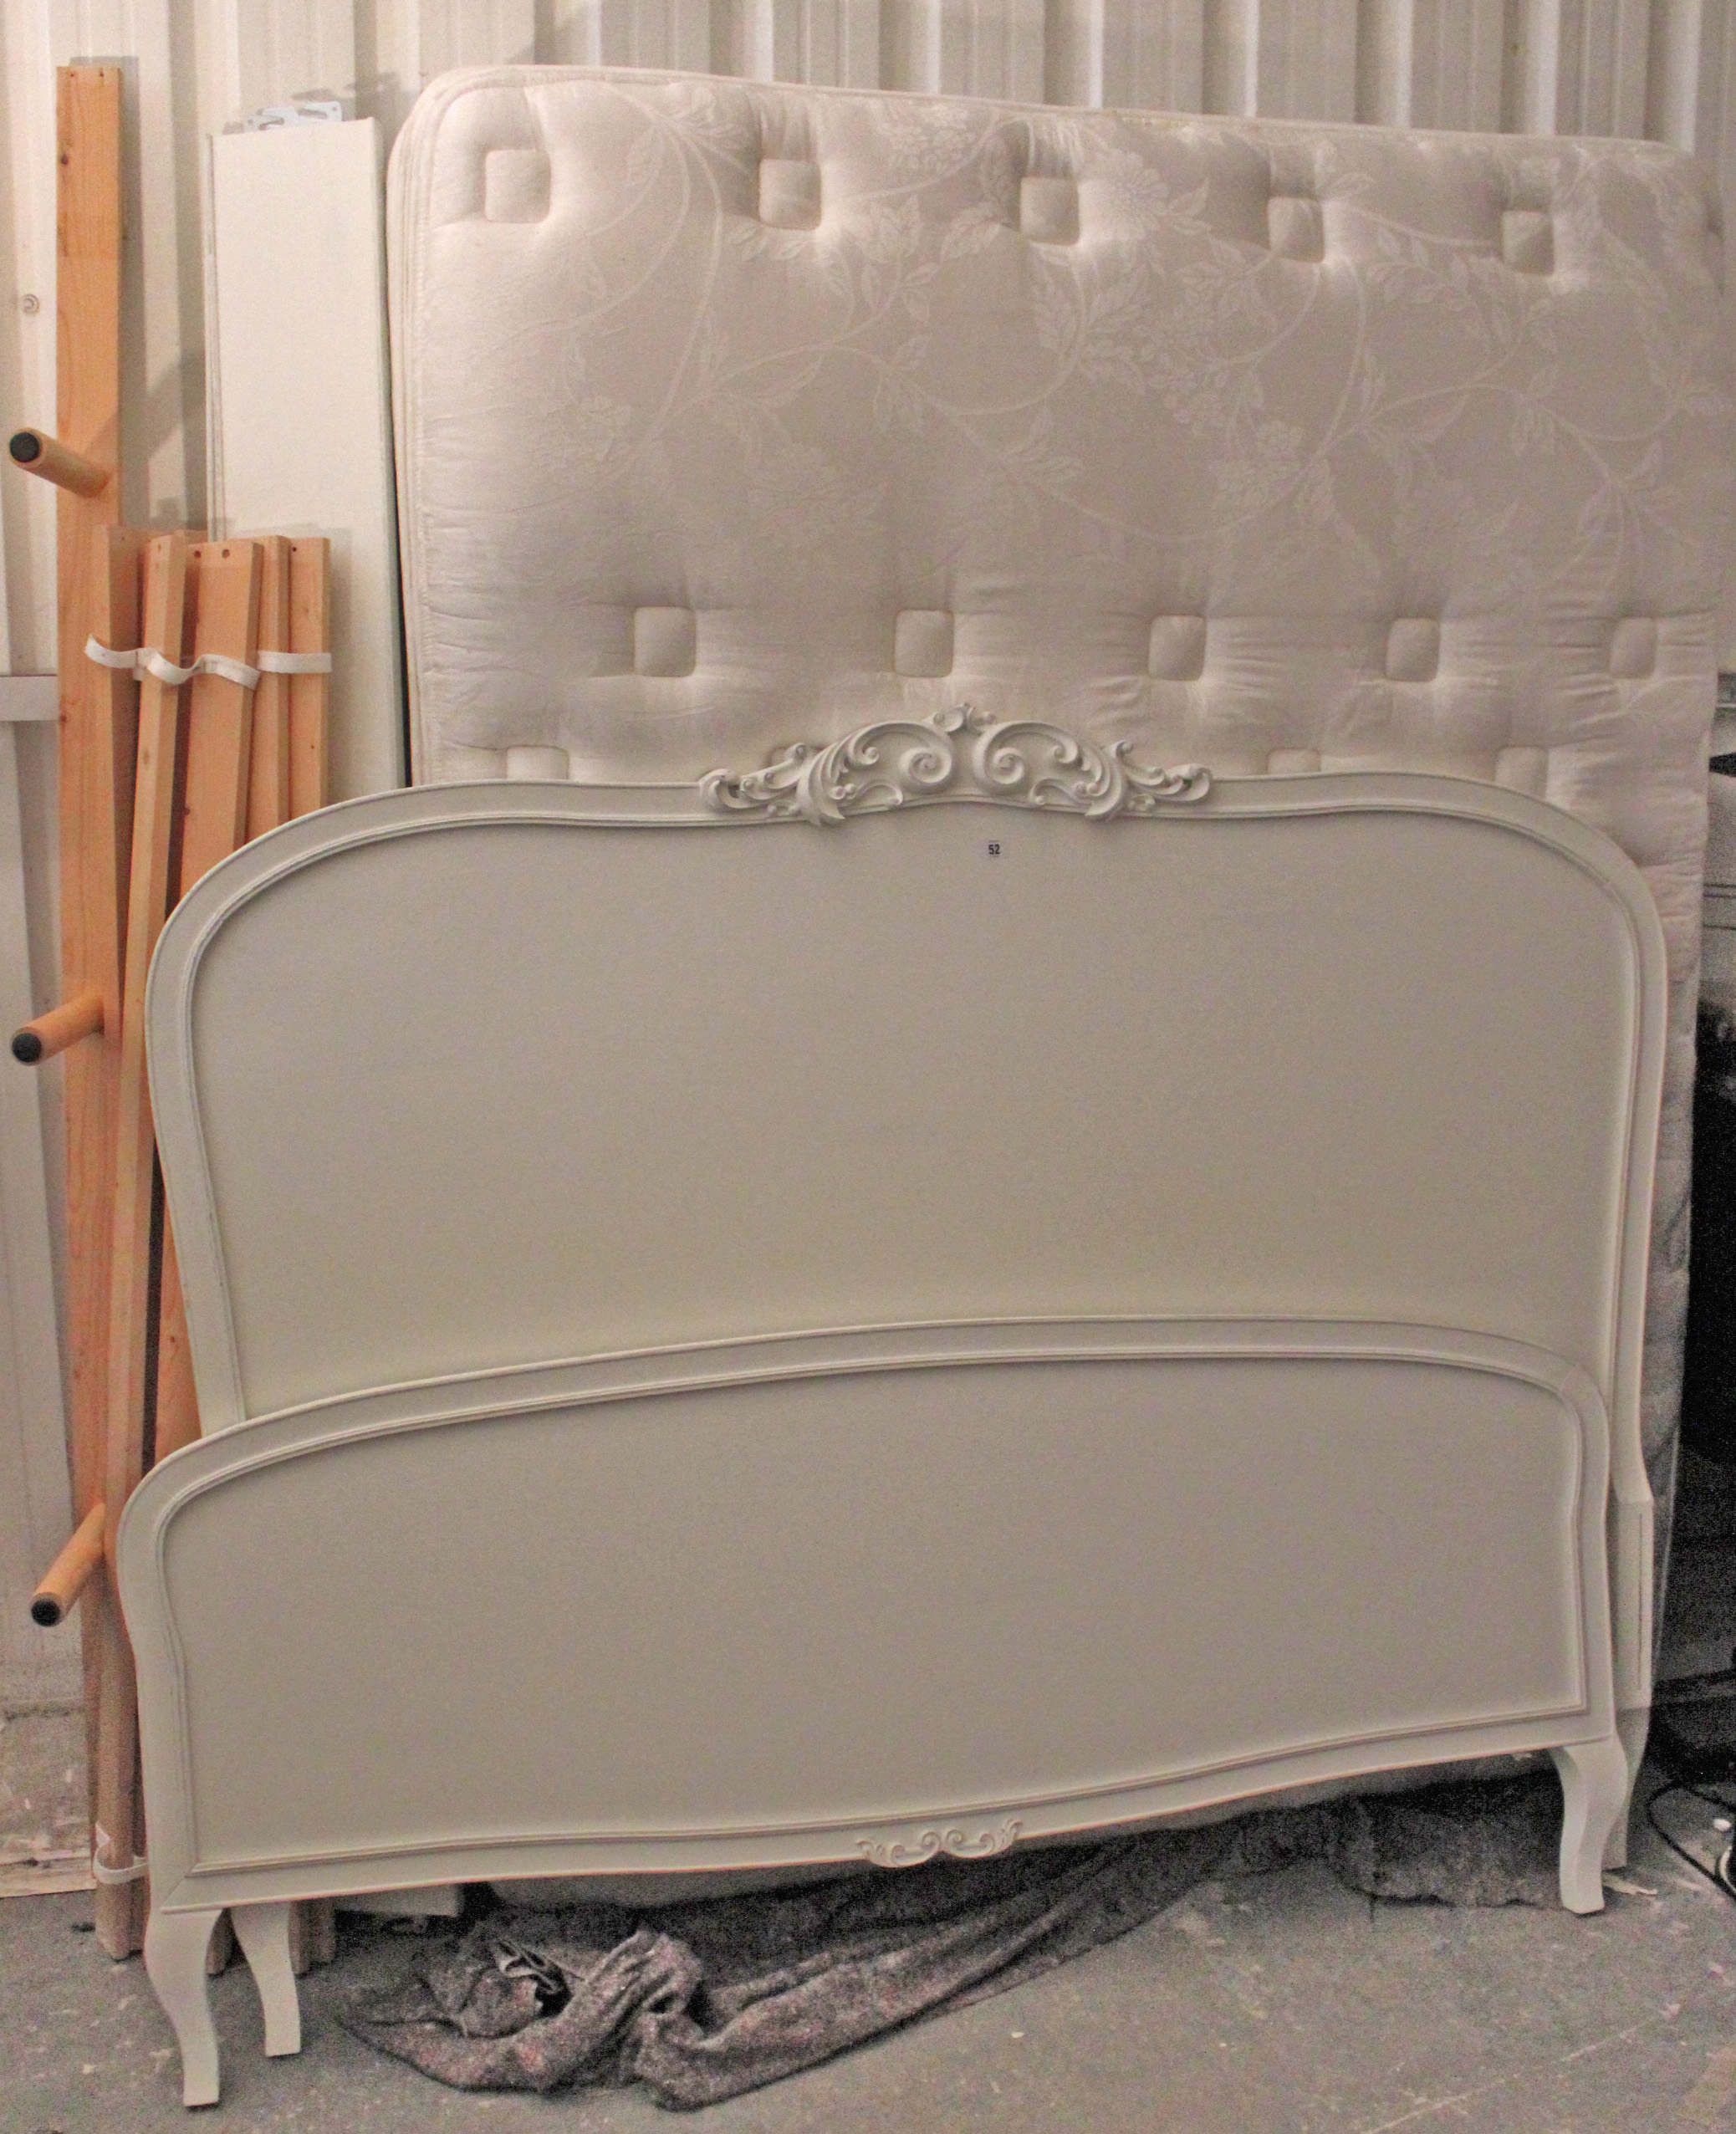 A continental-style white painted wooden 5’ 6” bedstead, complete with mattress.